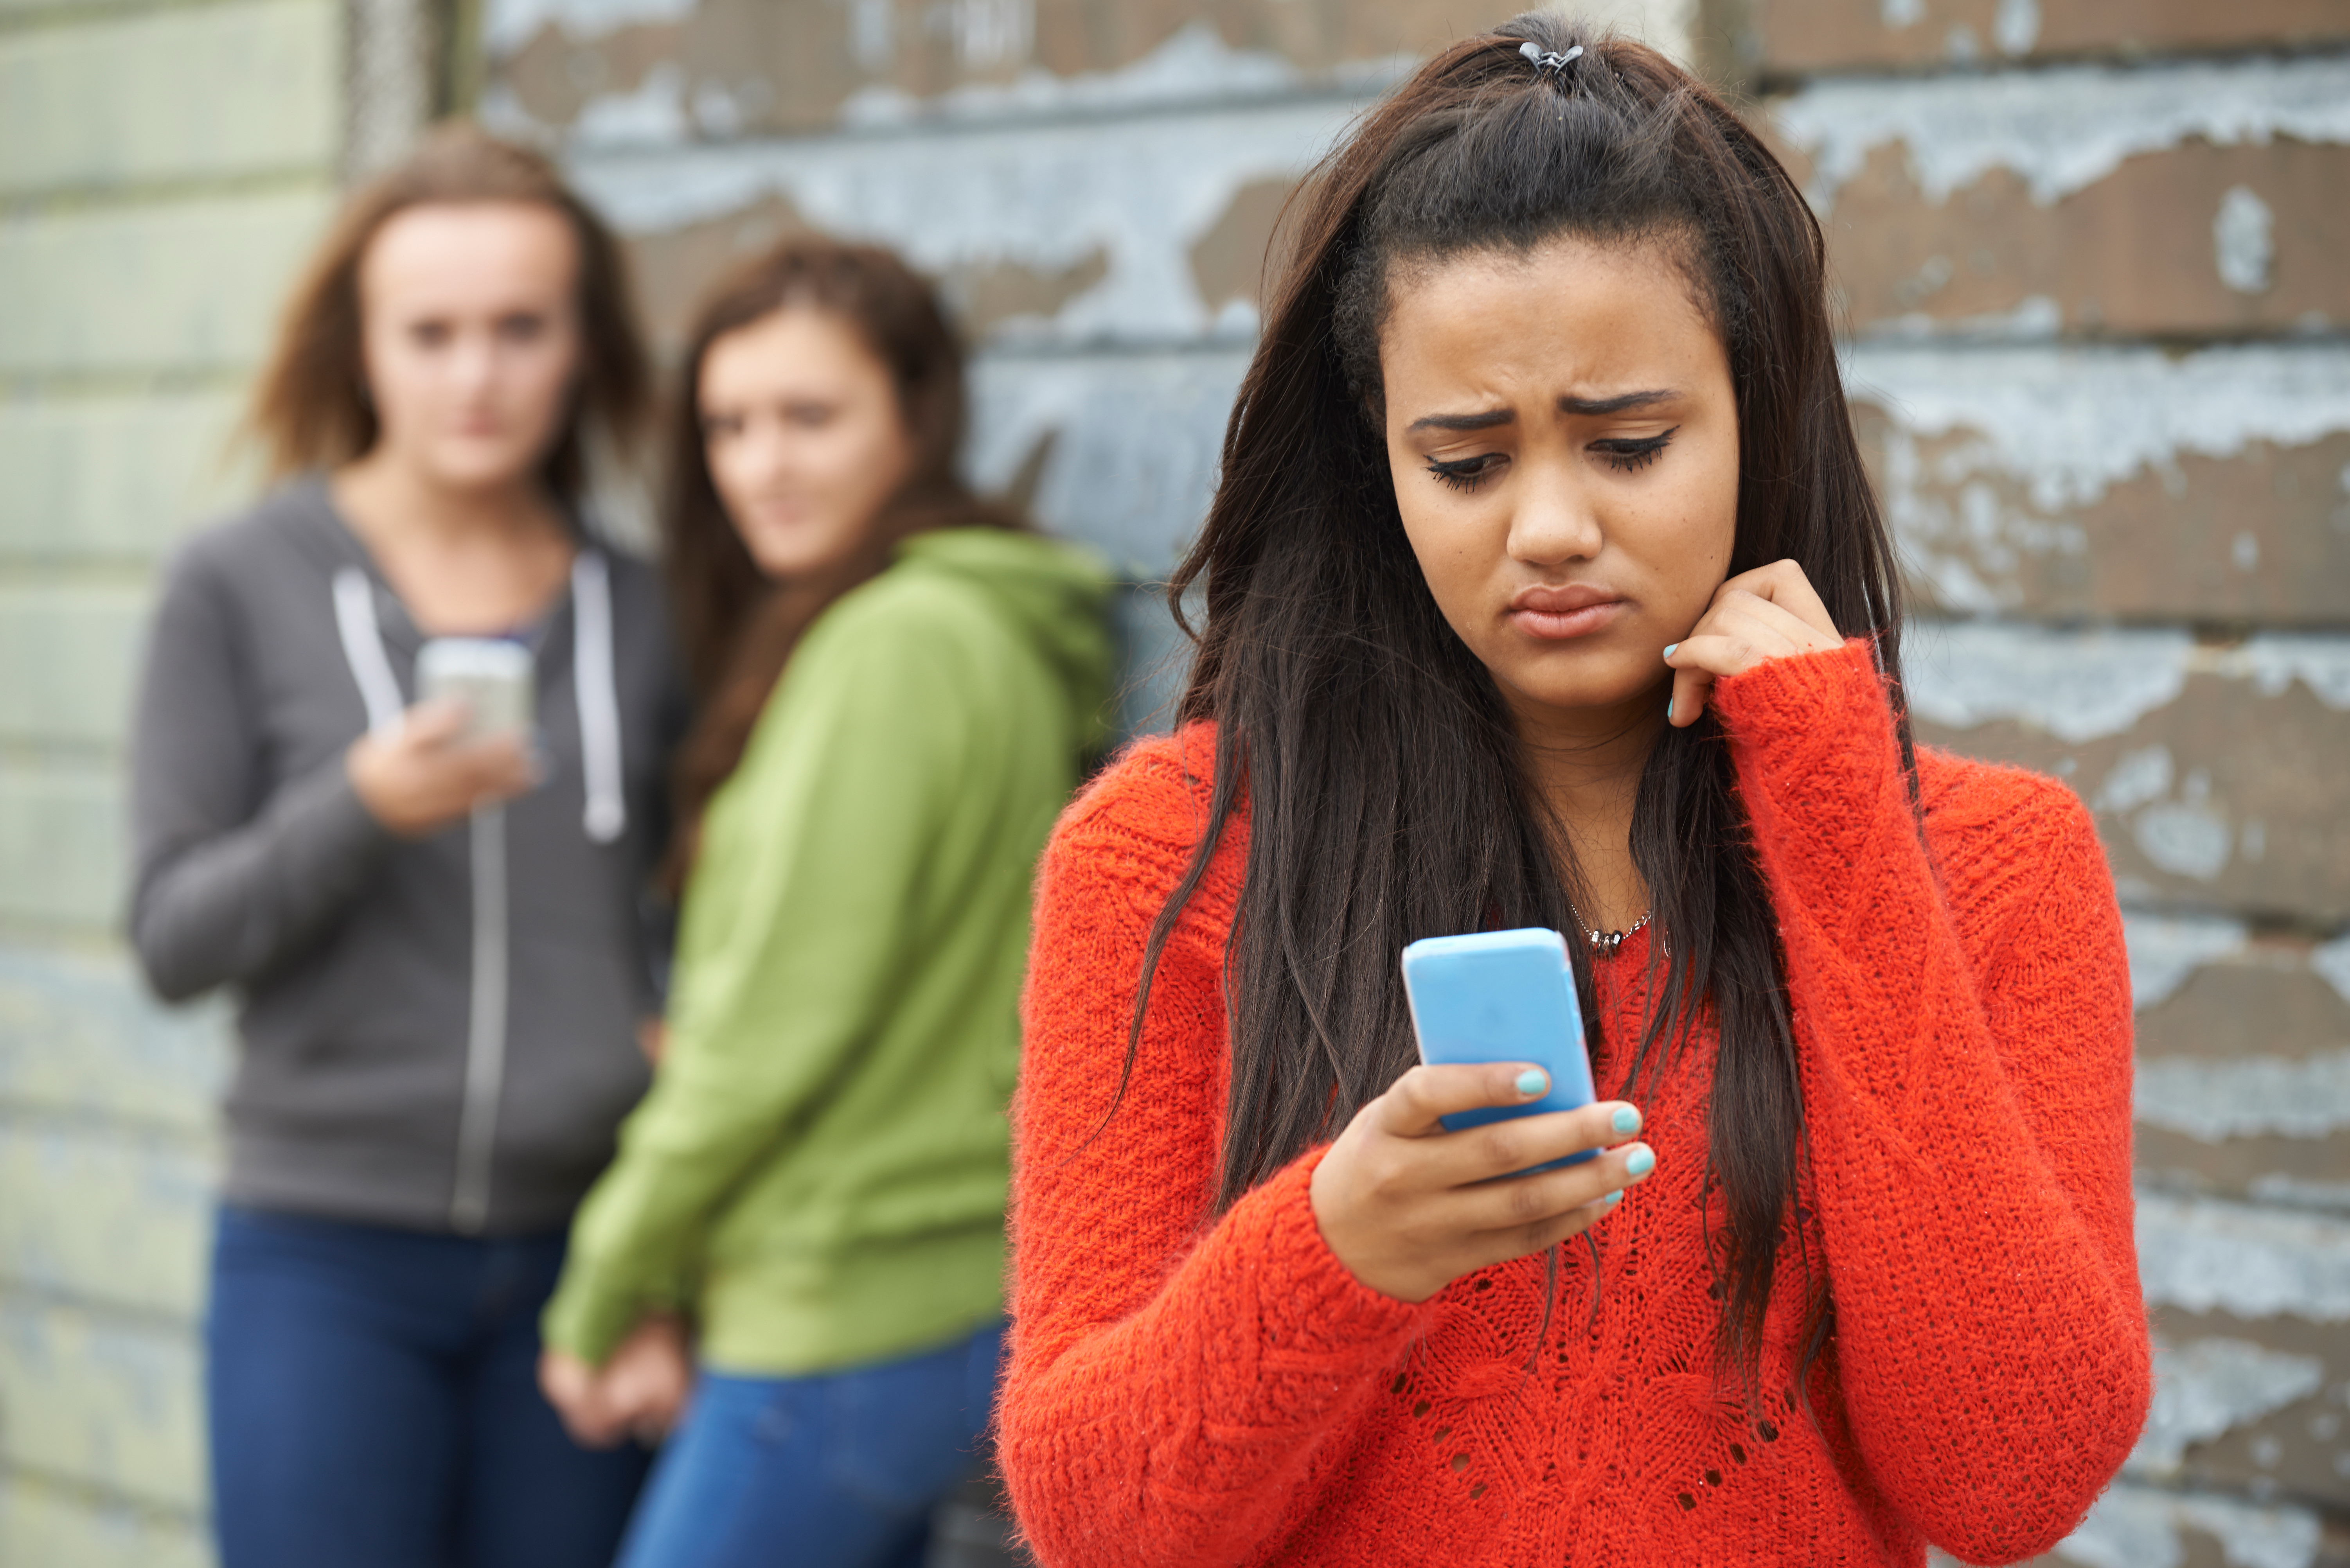 A girl looking sadly at her phone | Source: Shutterstock